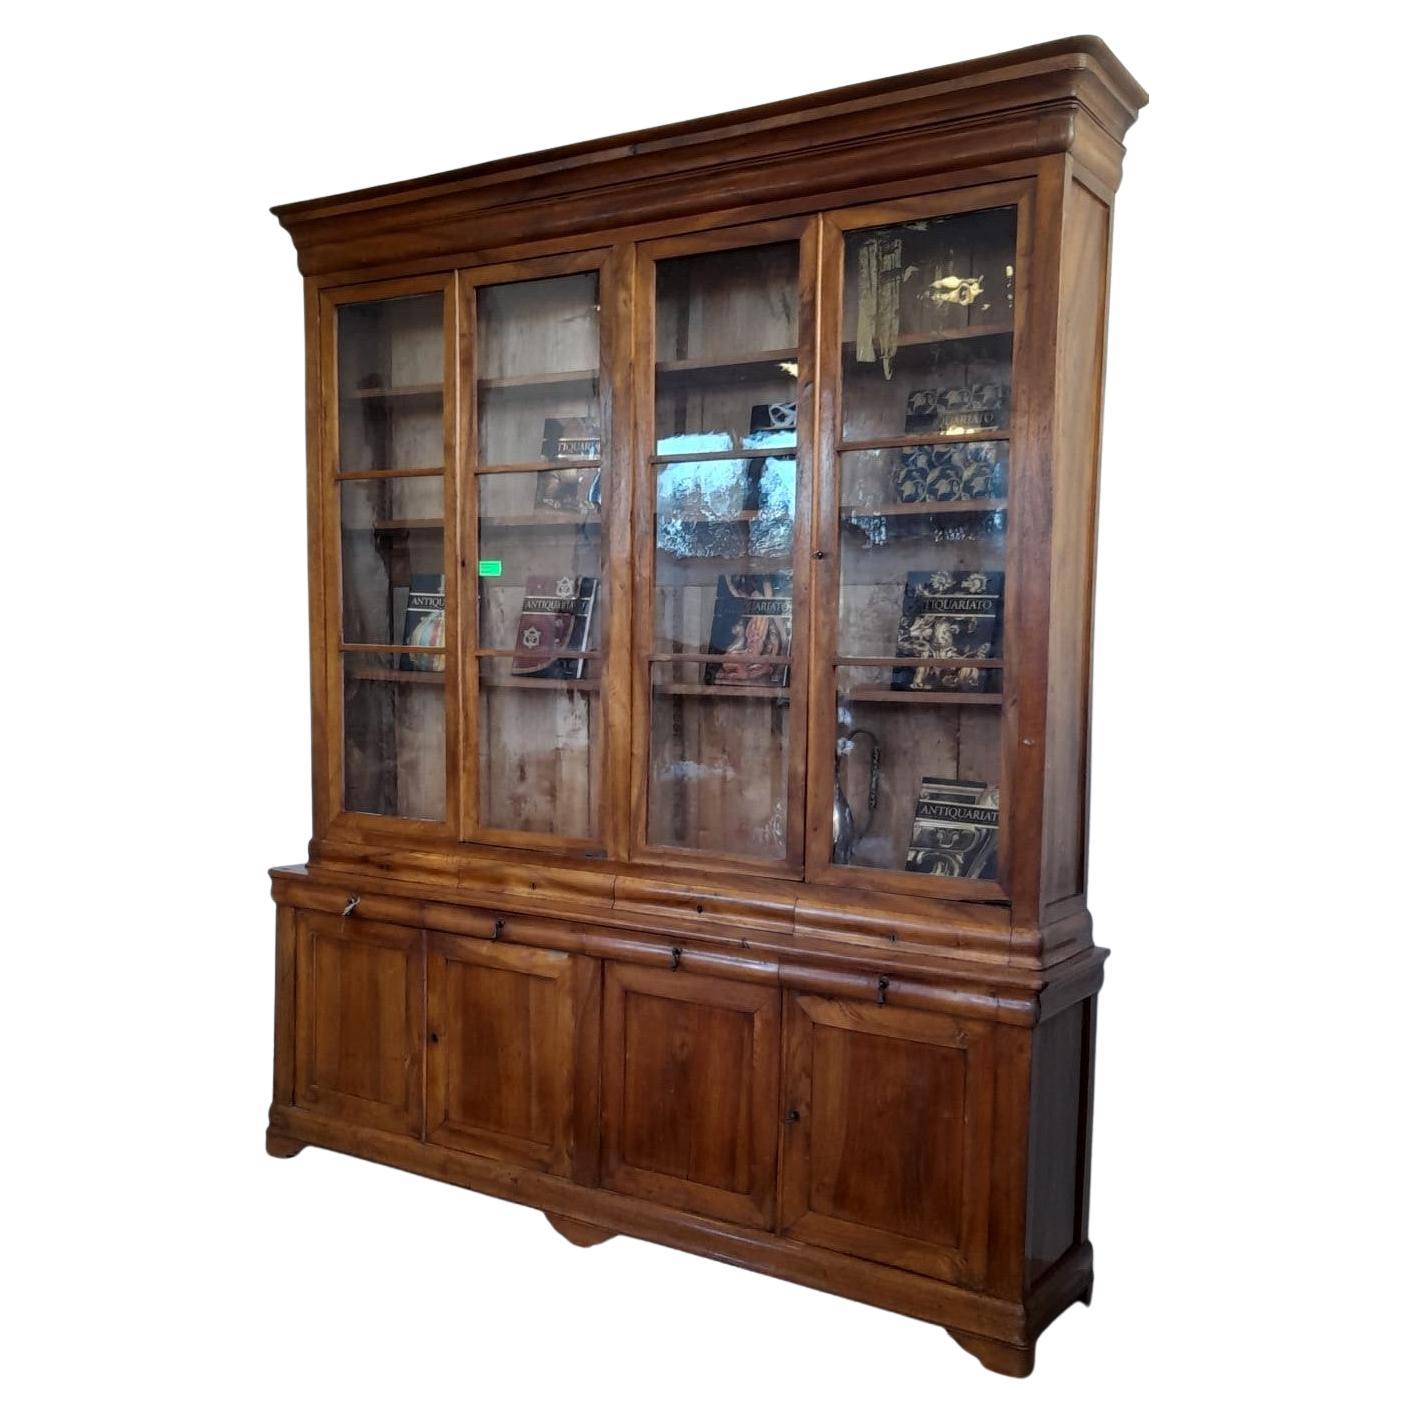 Walnut bookcase with showcase and drawers of the XIXth century
Mid XIXth Century
Nineteenth-century two-body 